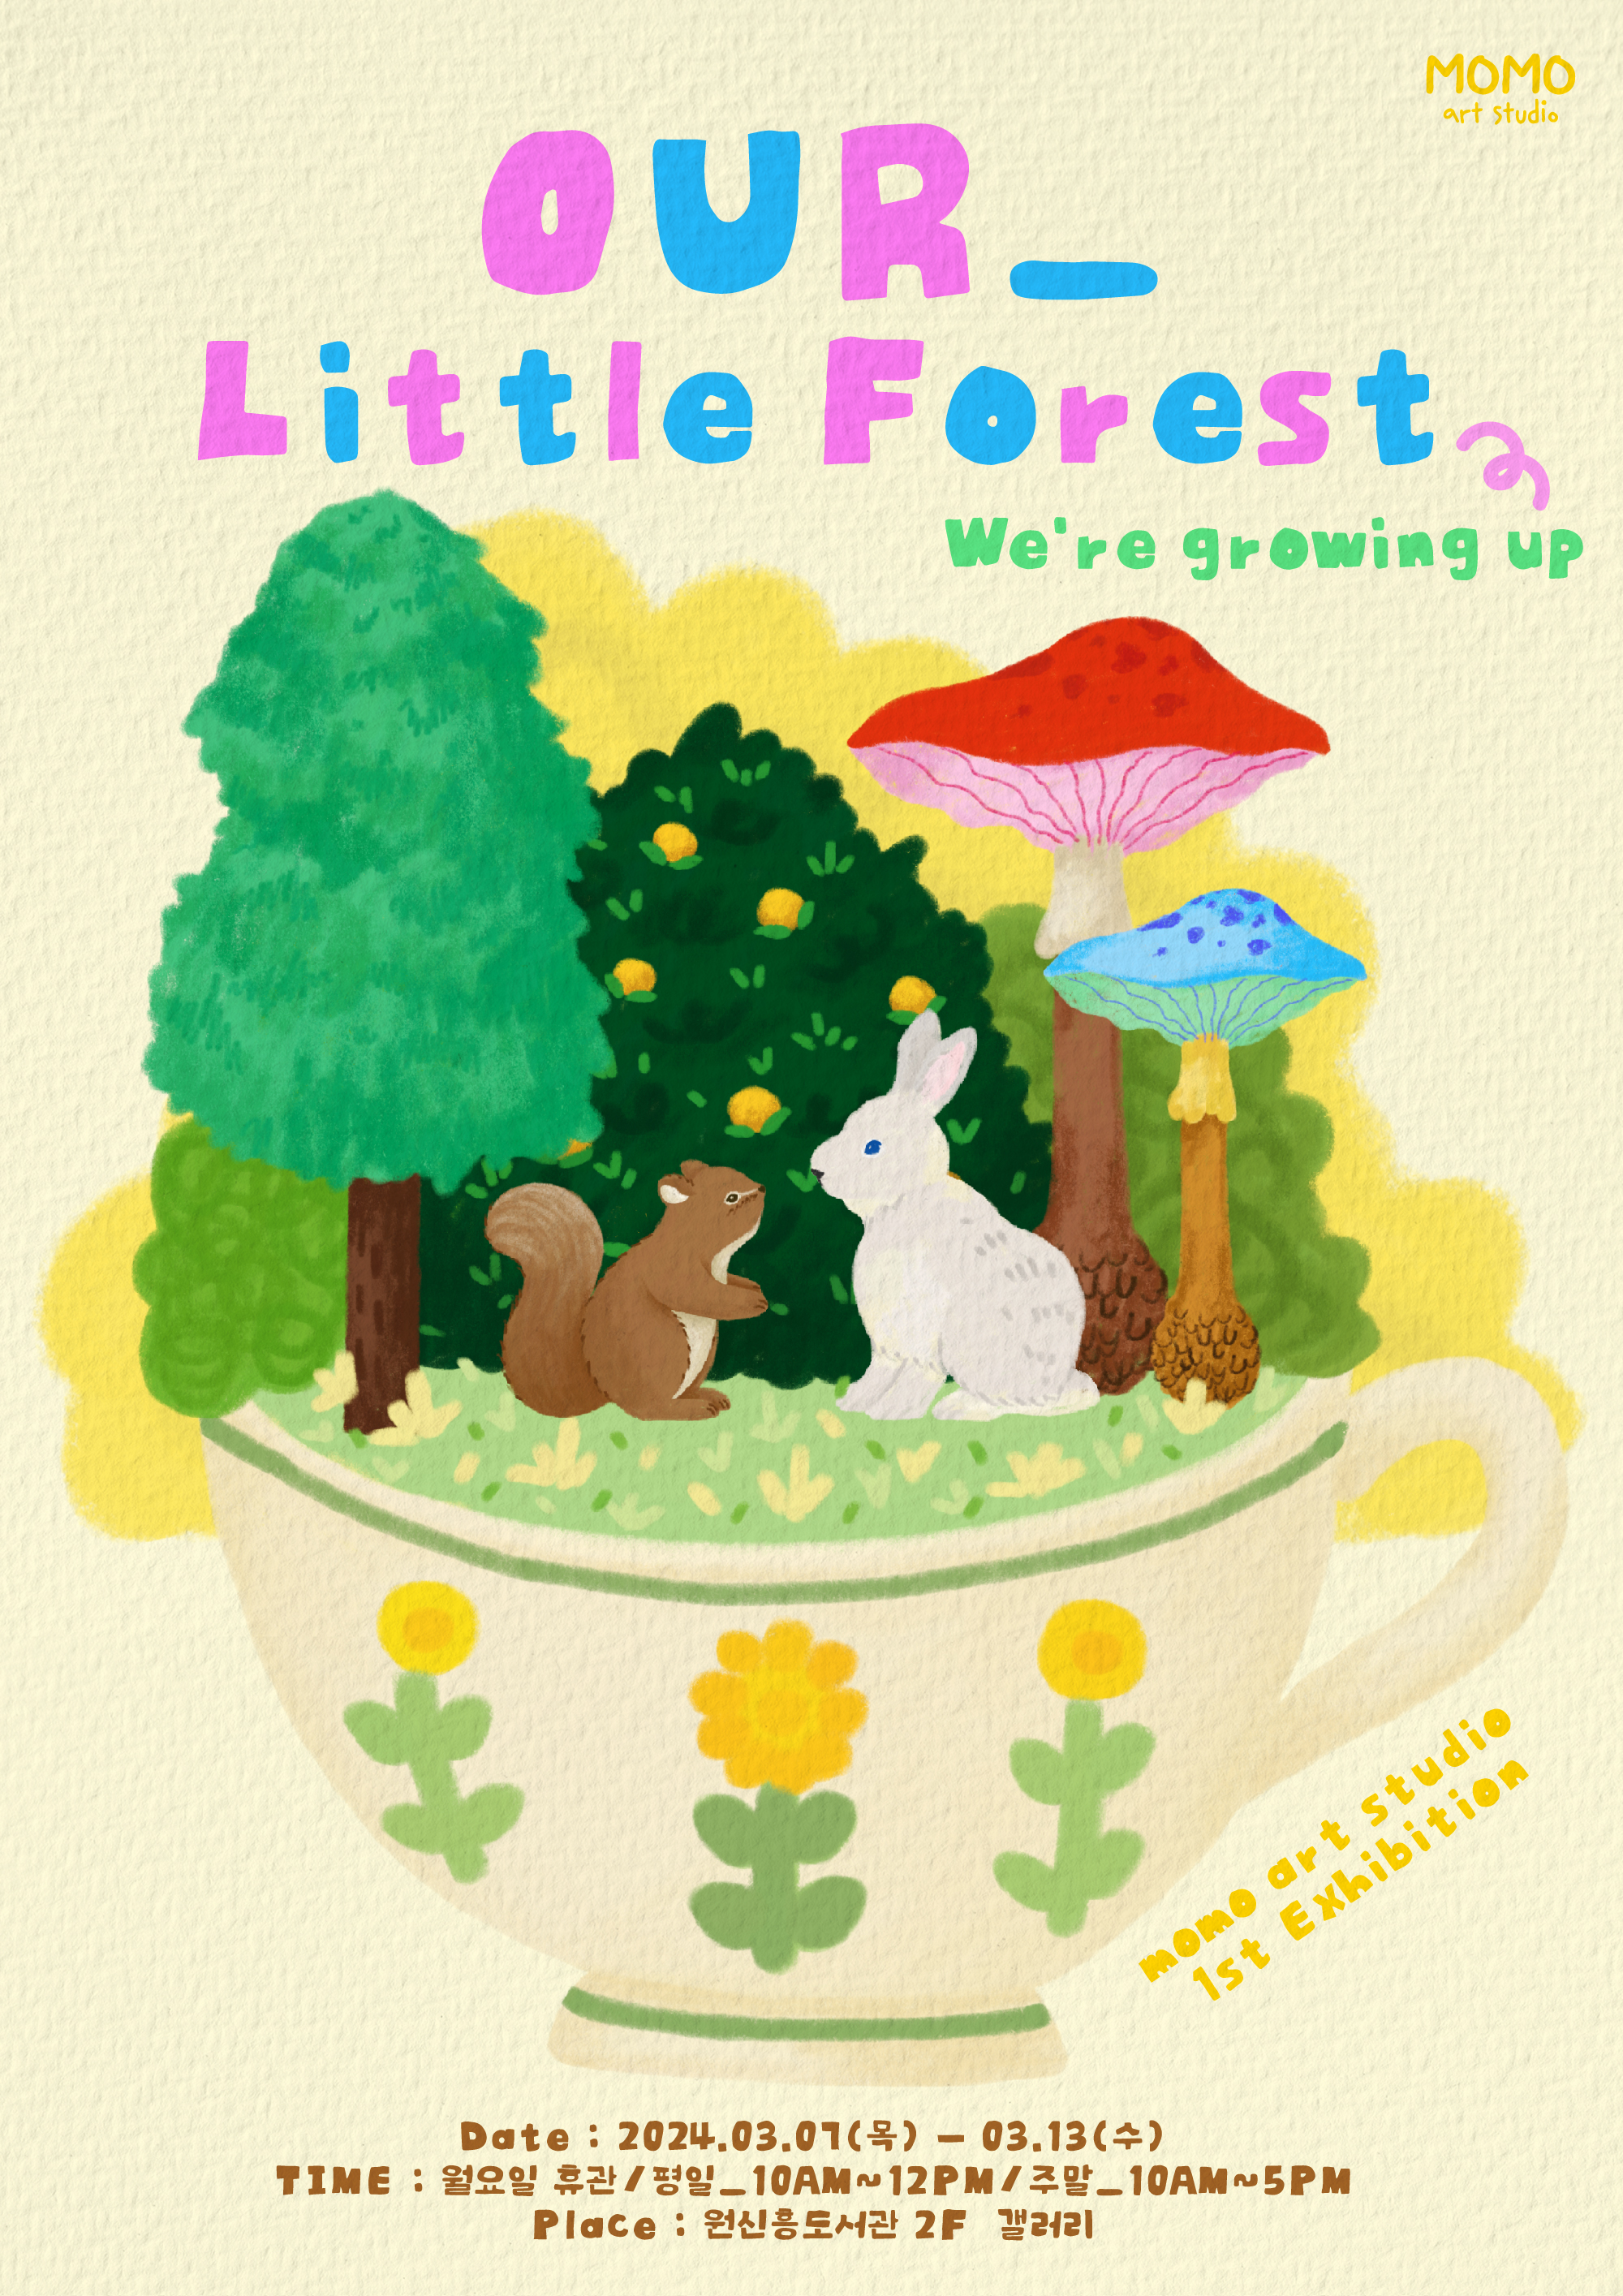 OUR Little Forest We're growing up momo art studio 1st Exhibition Date : 2024.03.01(목)-03.13(수) TIME : 월요일 휴관 / 평일 10AM~12PM / 주말 10AM~5PM Place : 원신흥도서관 2F 갤러리